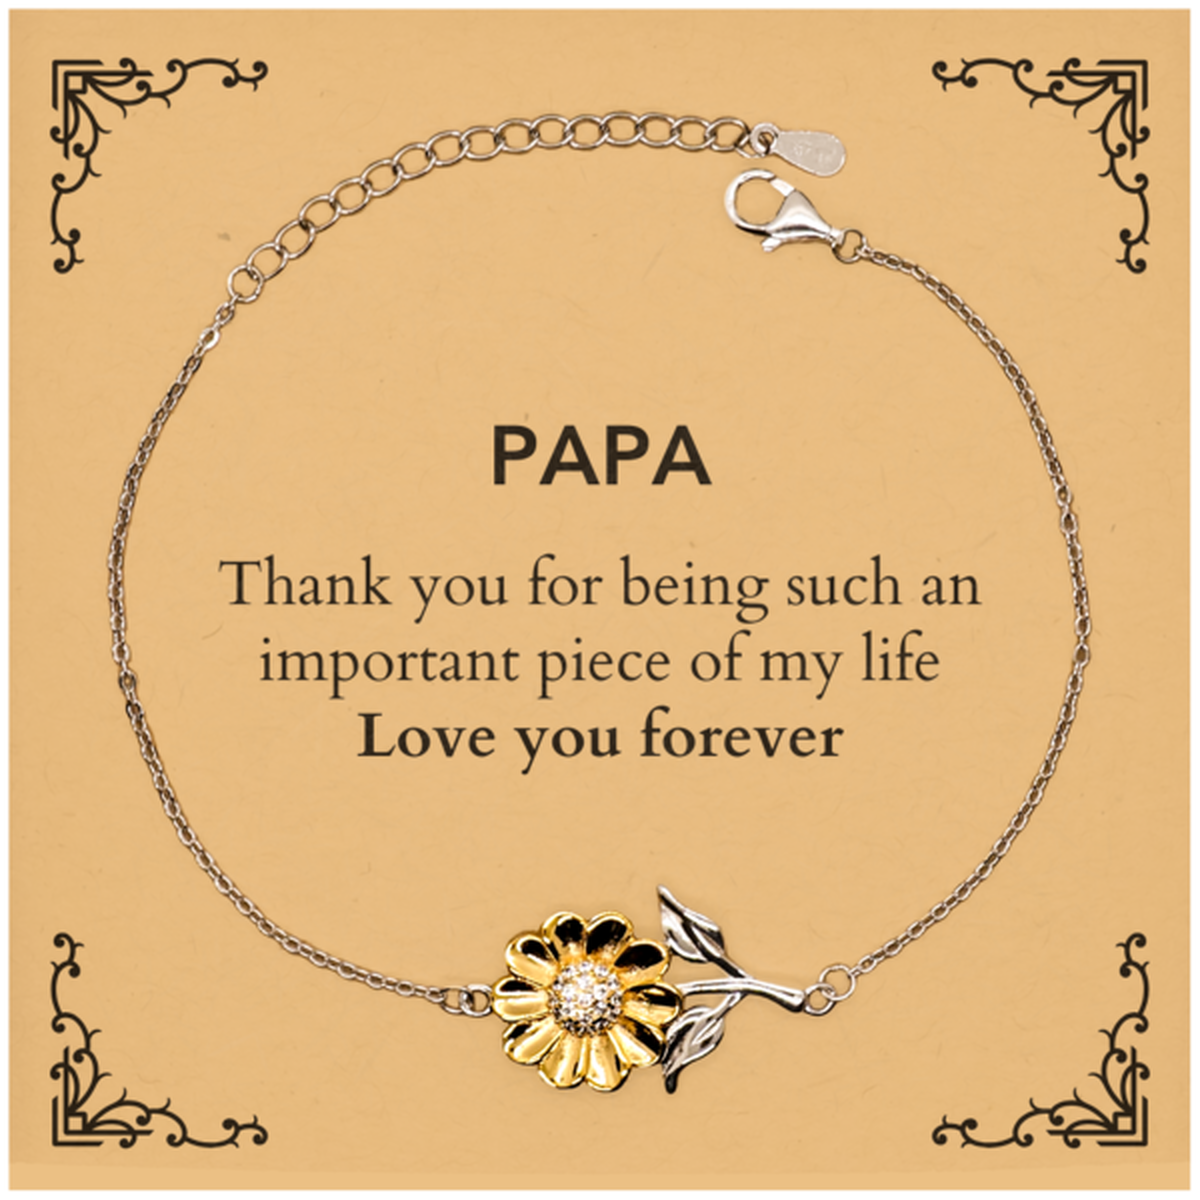 Appropriate Papa Sunflower Bracelet Epic Birthday Gifts for Papa Thank you for being such an important piece of my life Papa Christmas Mothers Fathers Day